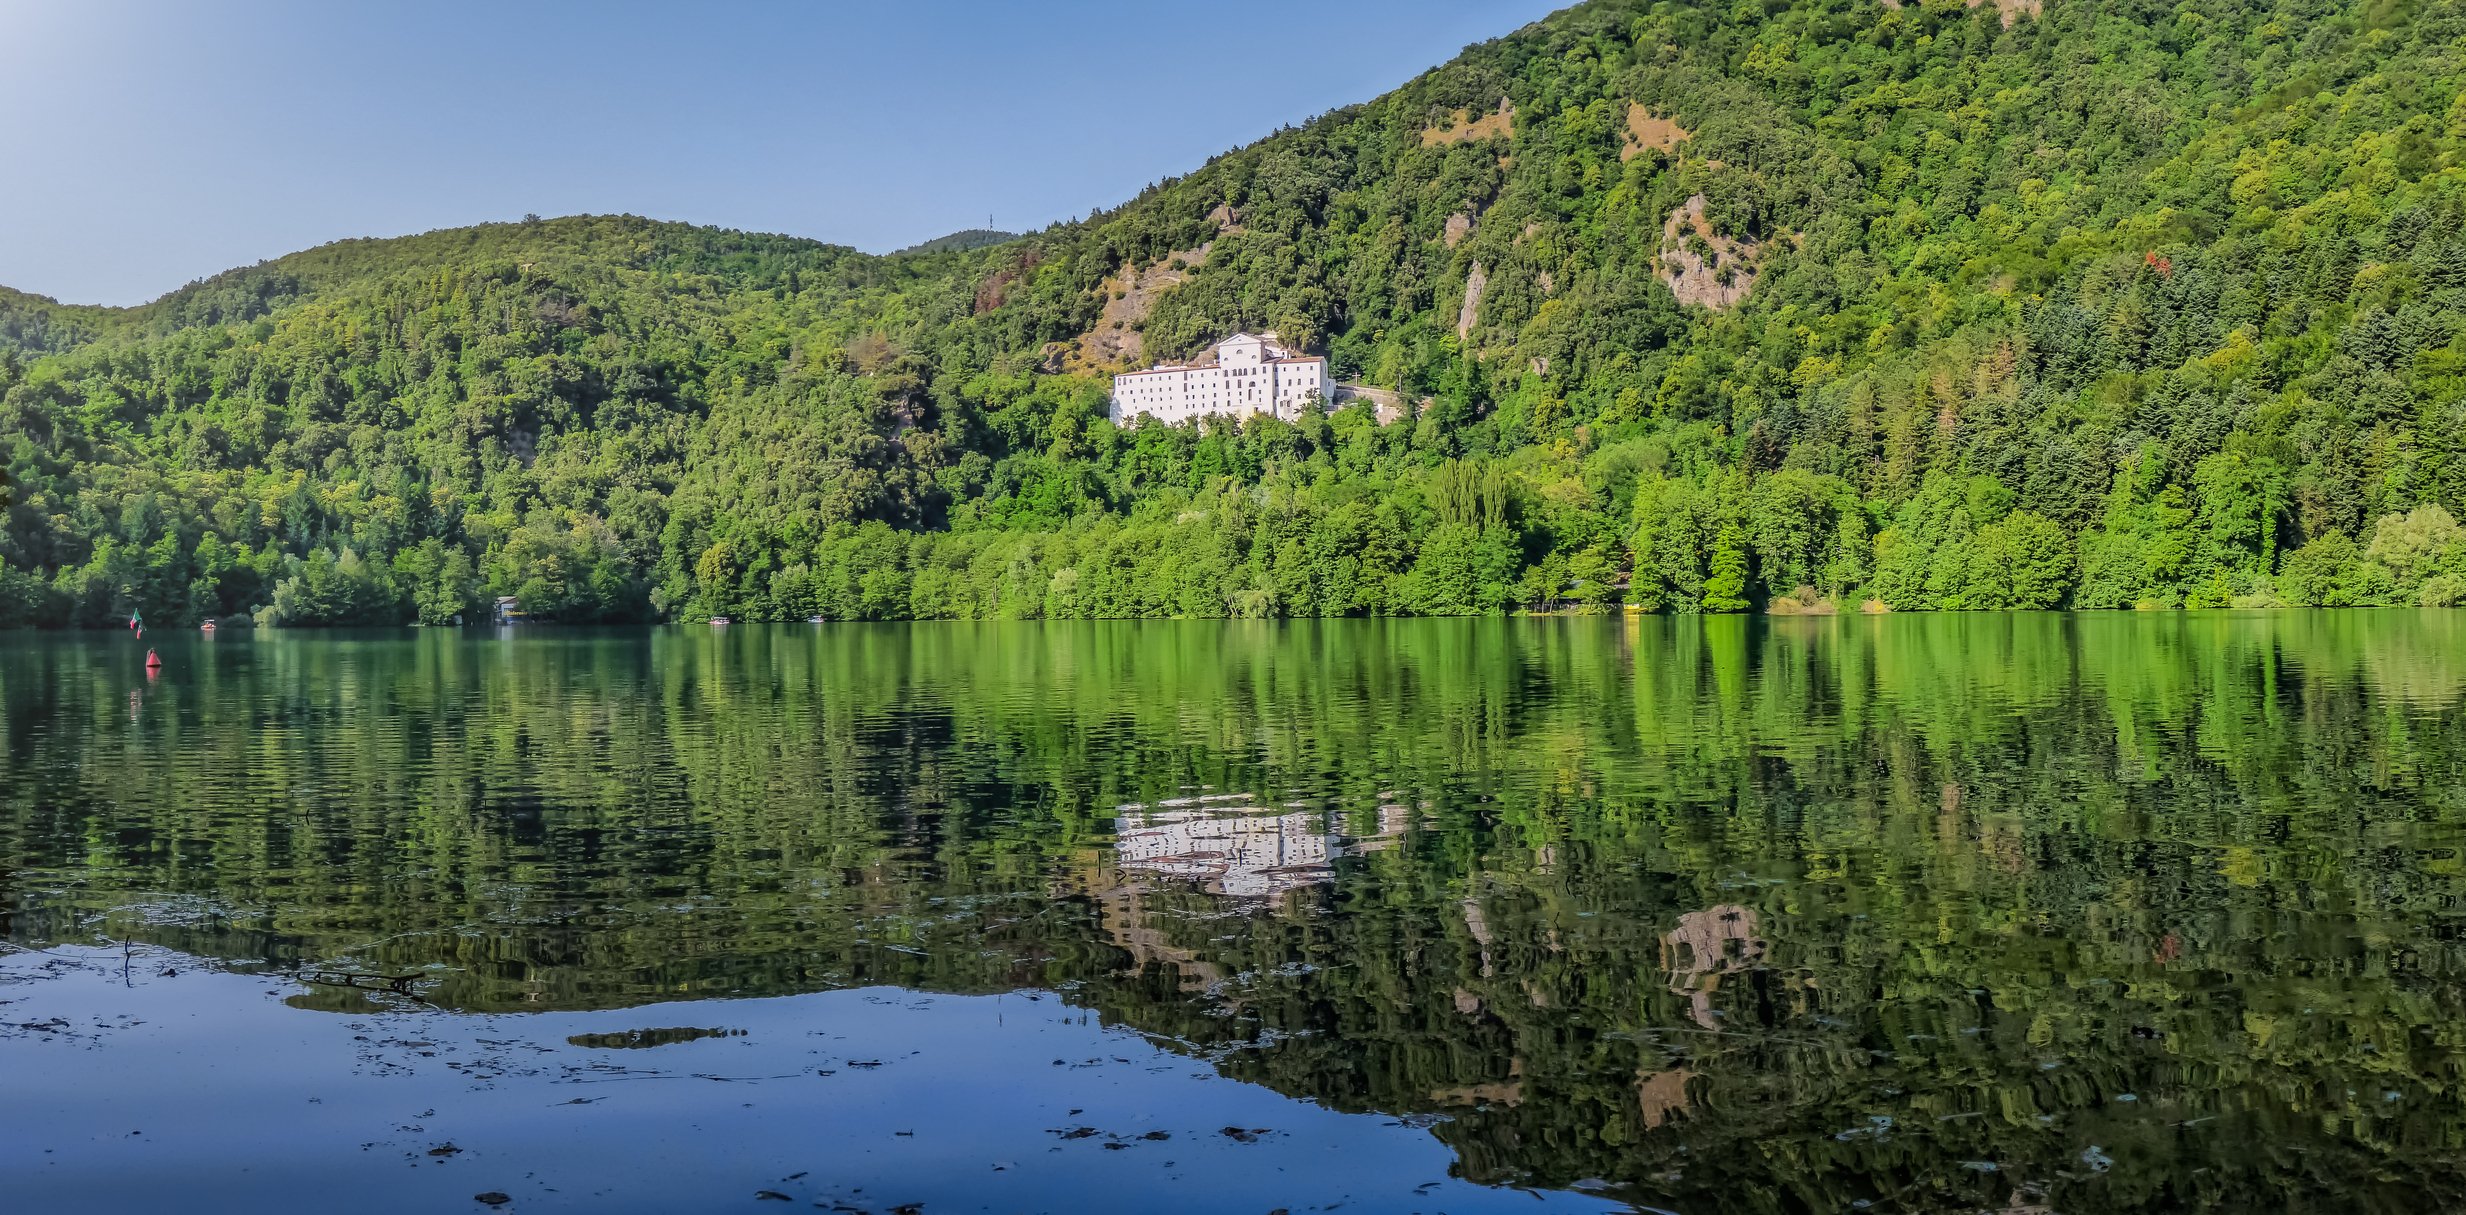 dreamstime_m_80964286 Monticchio Lake with famous Abbey and Monte Vulture, Basilicata by minnystock.jpg